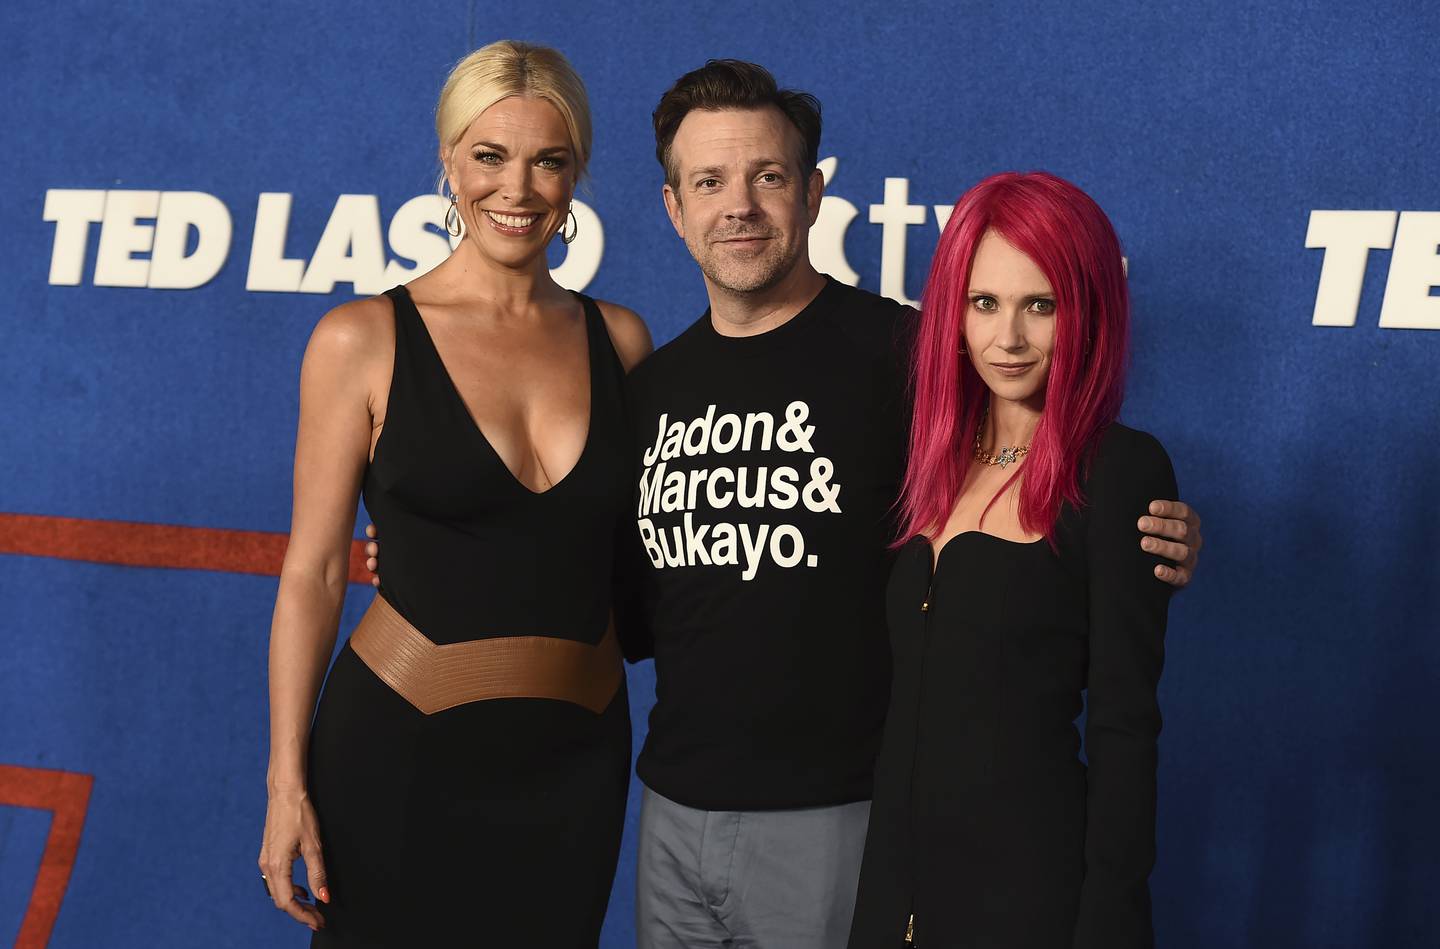 'Ted Lasso' stars, from left, Hannah Waddingham, Jason Sudeikis and Juno Temple, arrive at the premiere of the Apple TV+ show's second season, on Thursday, July 15, 2021. AP 